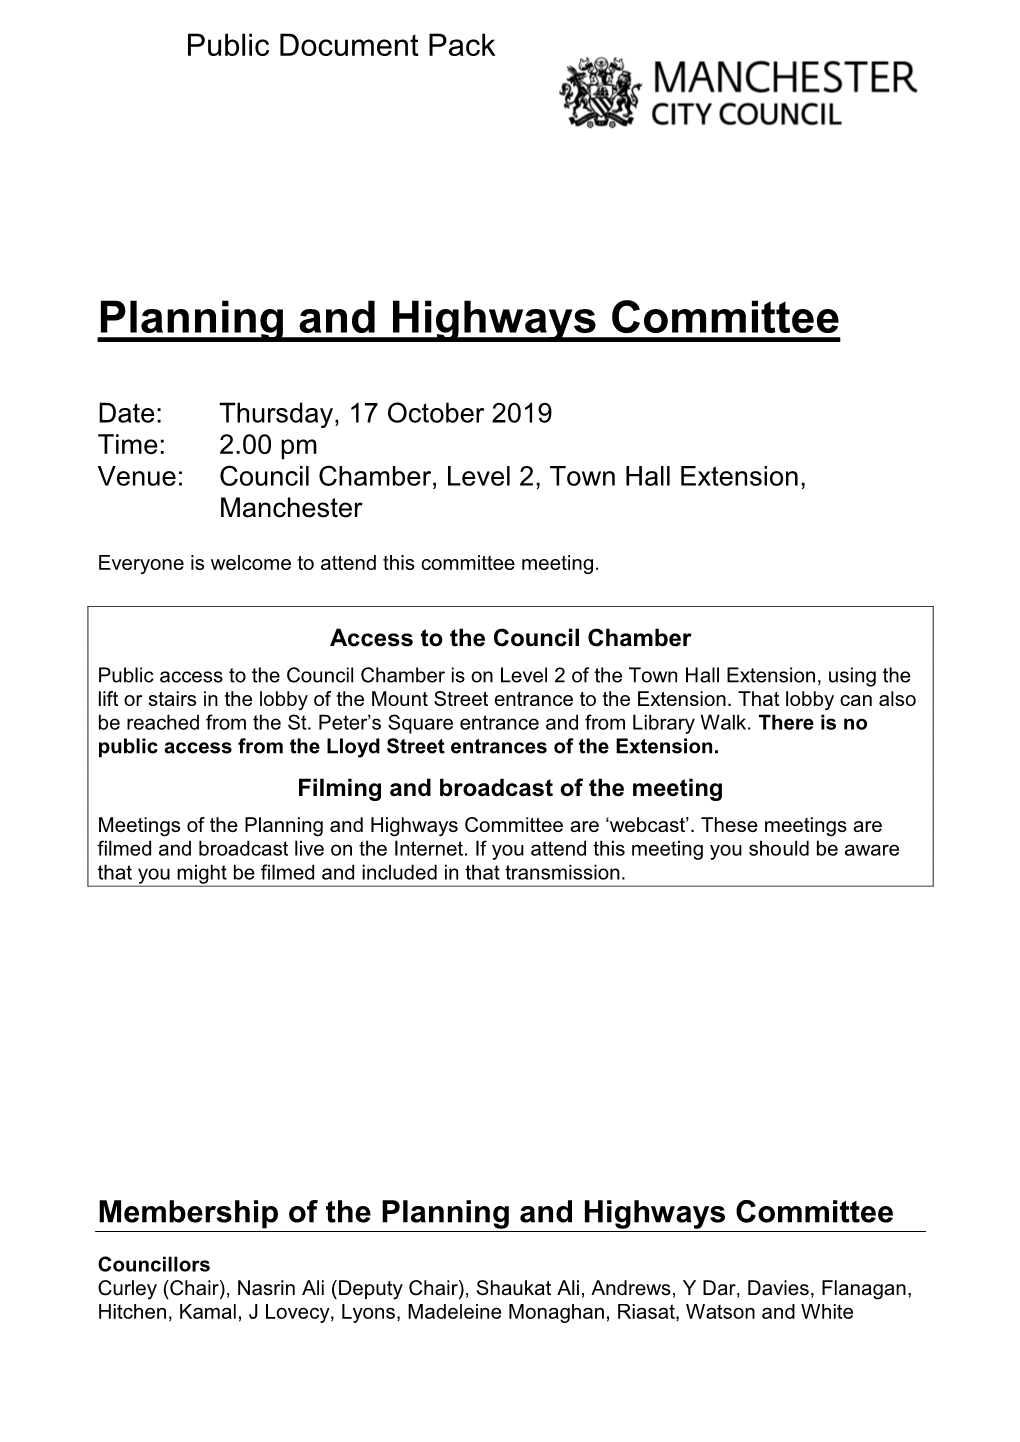 (Public Pack)Agenda Document for Planning and Highways Committee, 17/10/2019 14:00